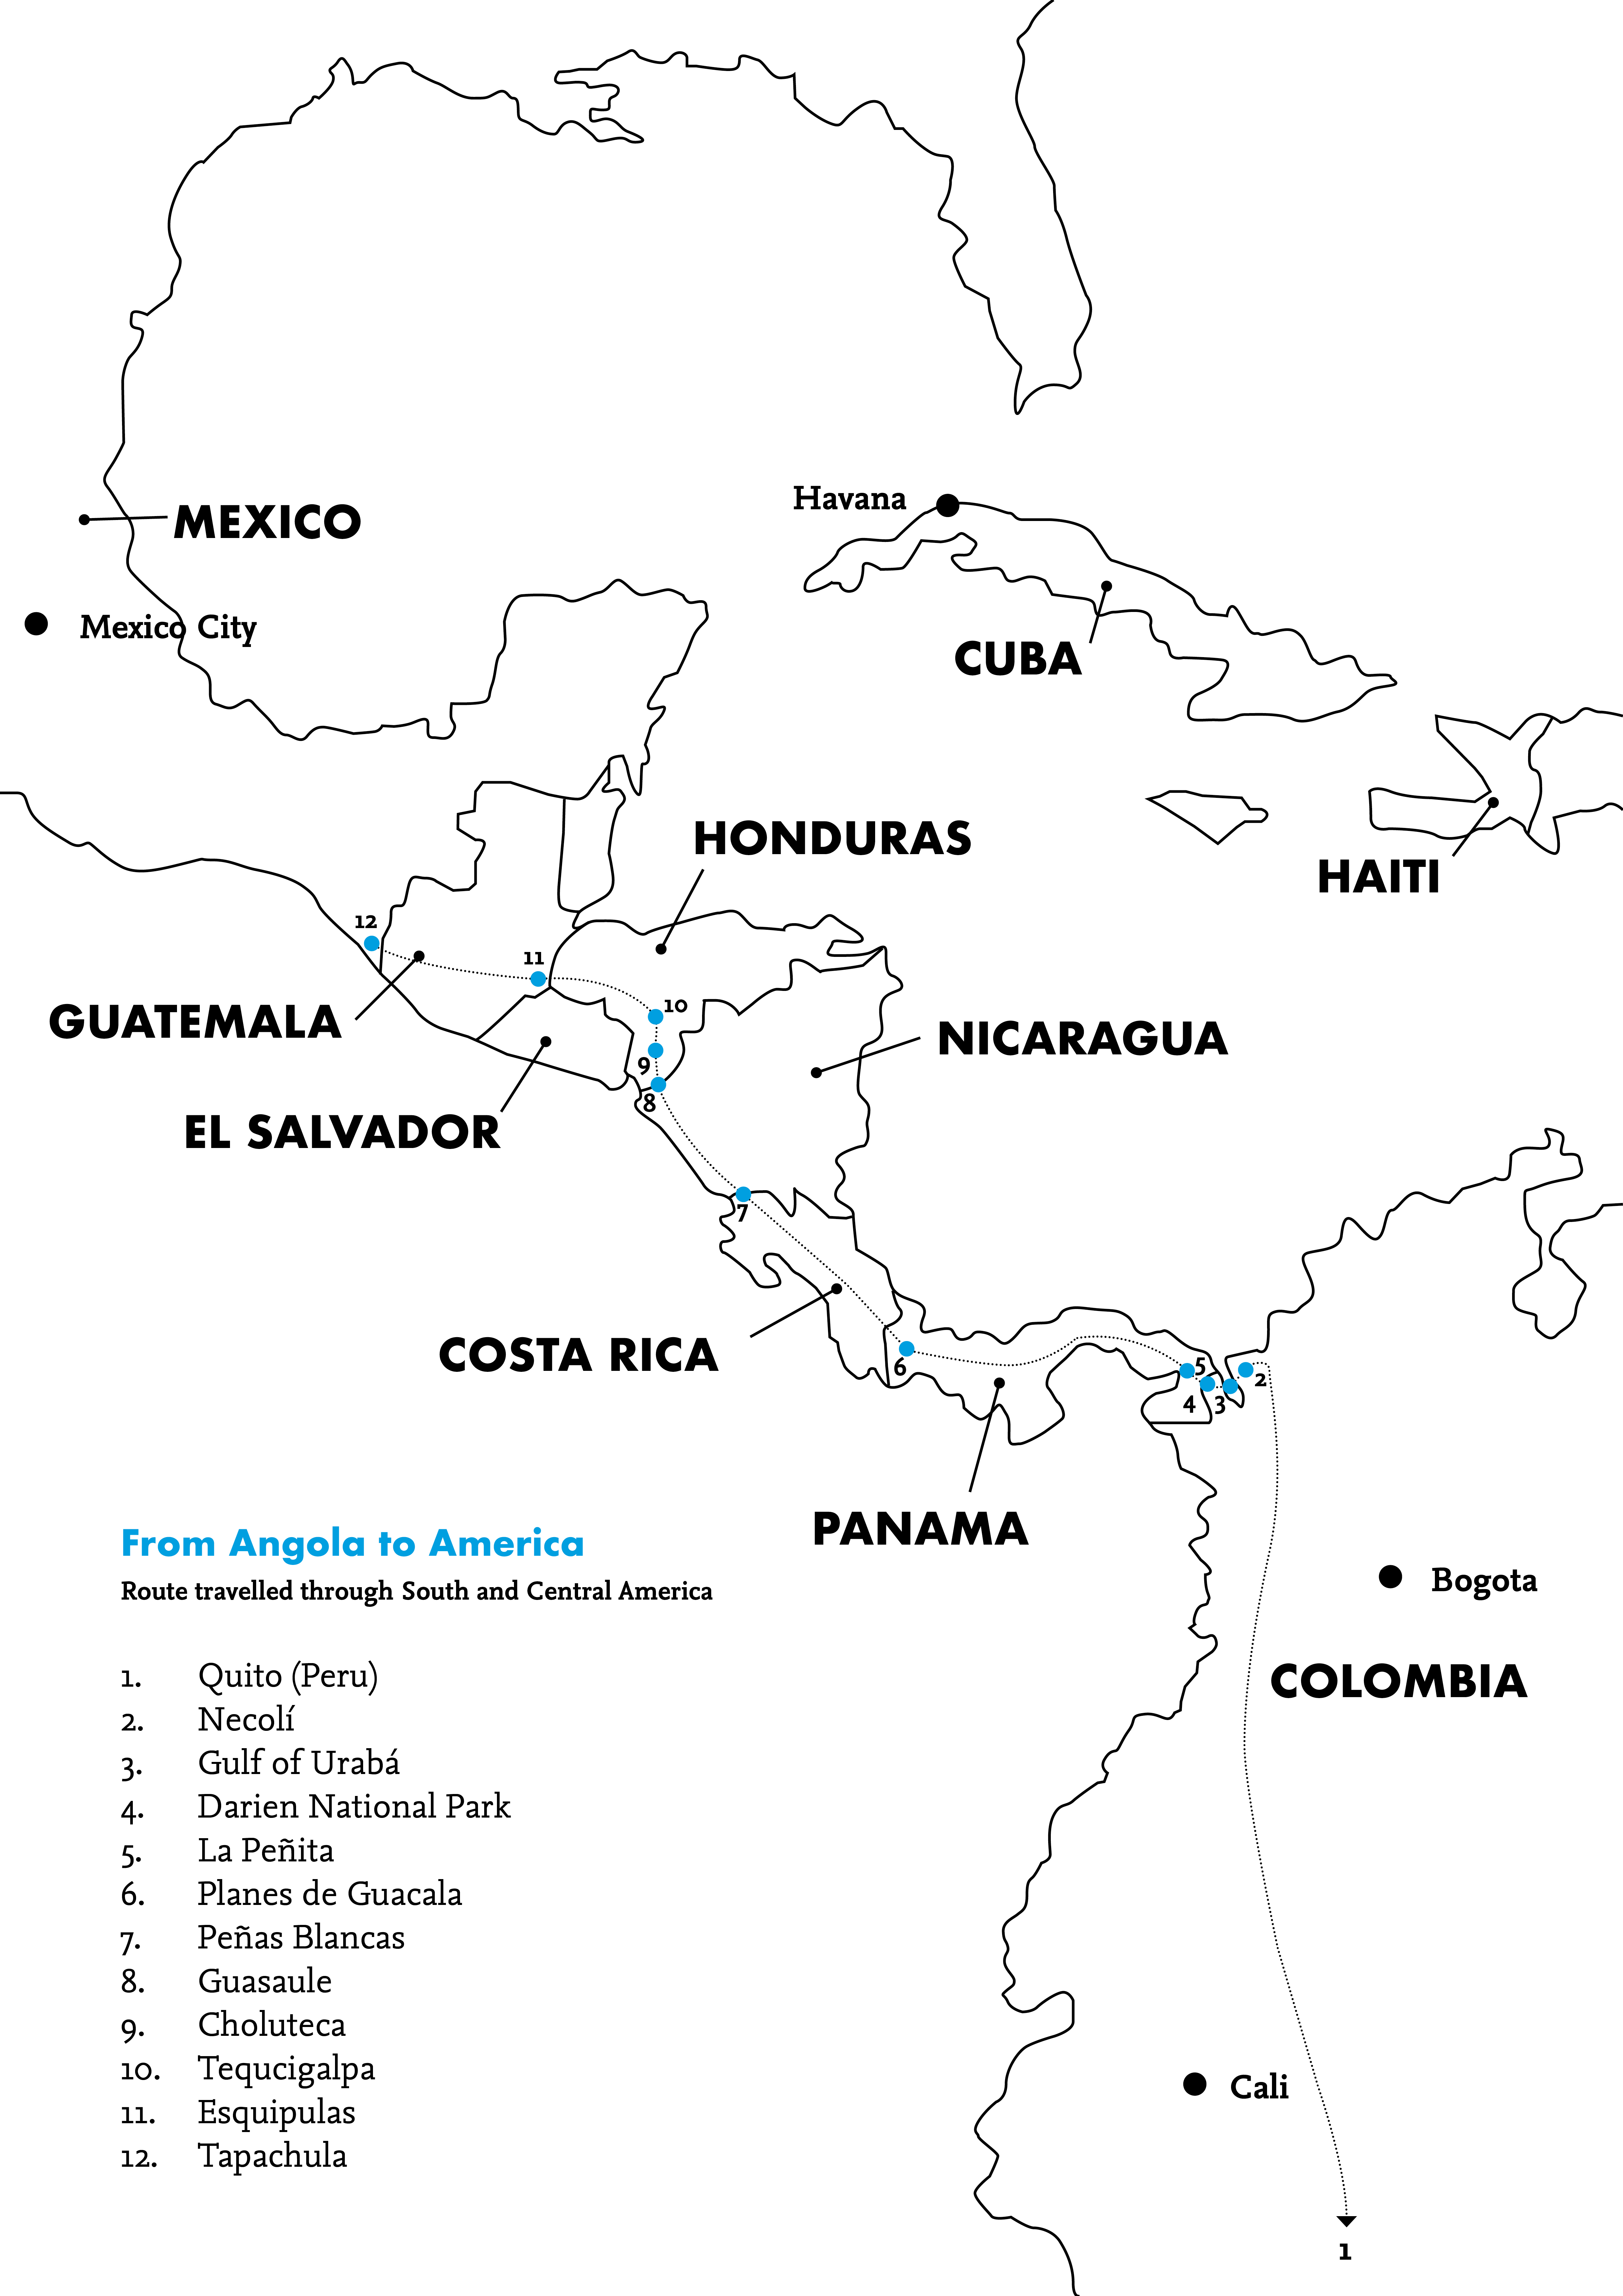 Map of route travelled by Ana and her family from South through Central America to the Mexican border.